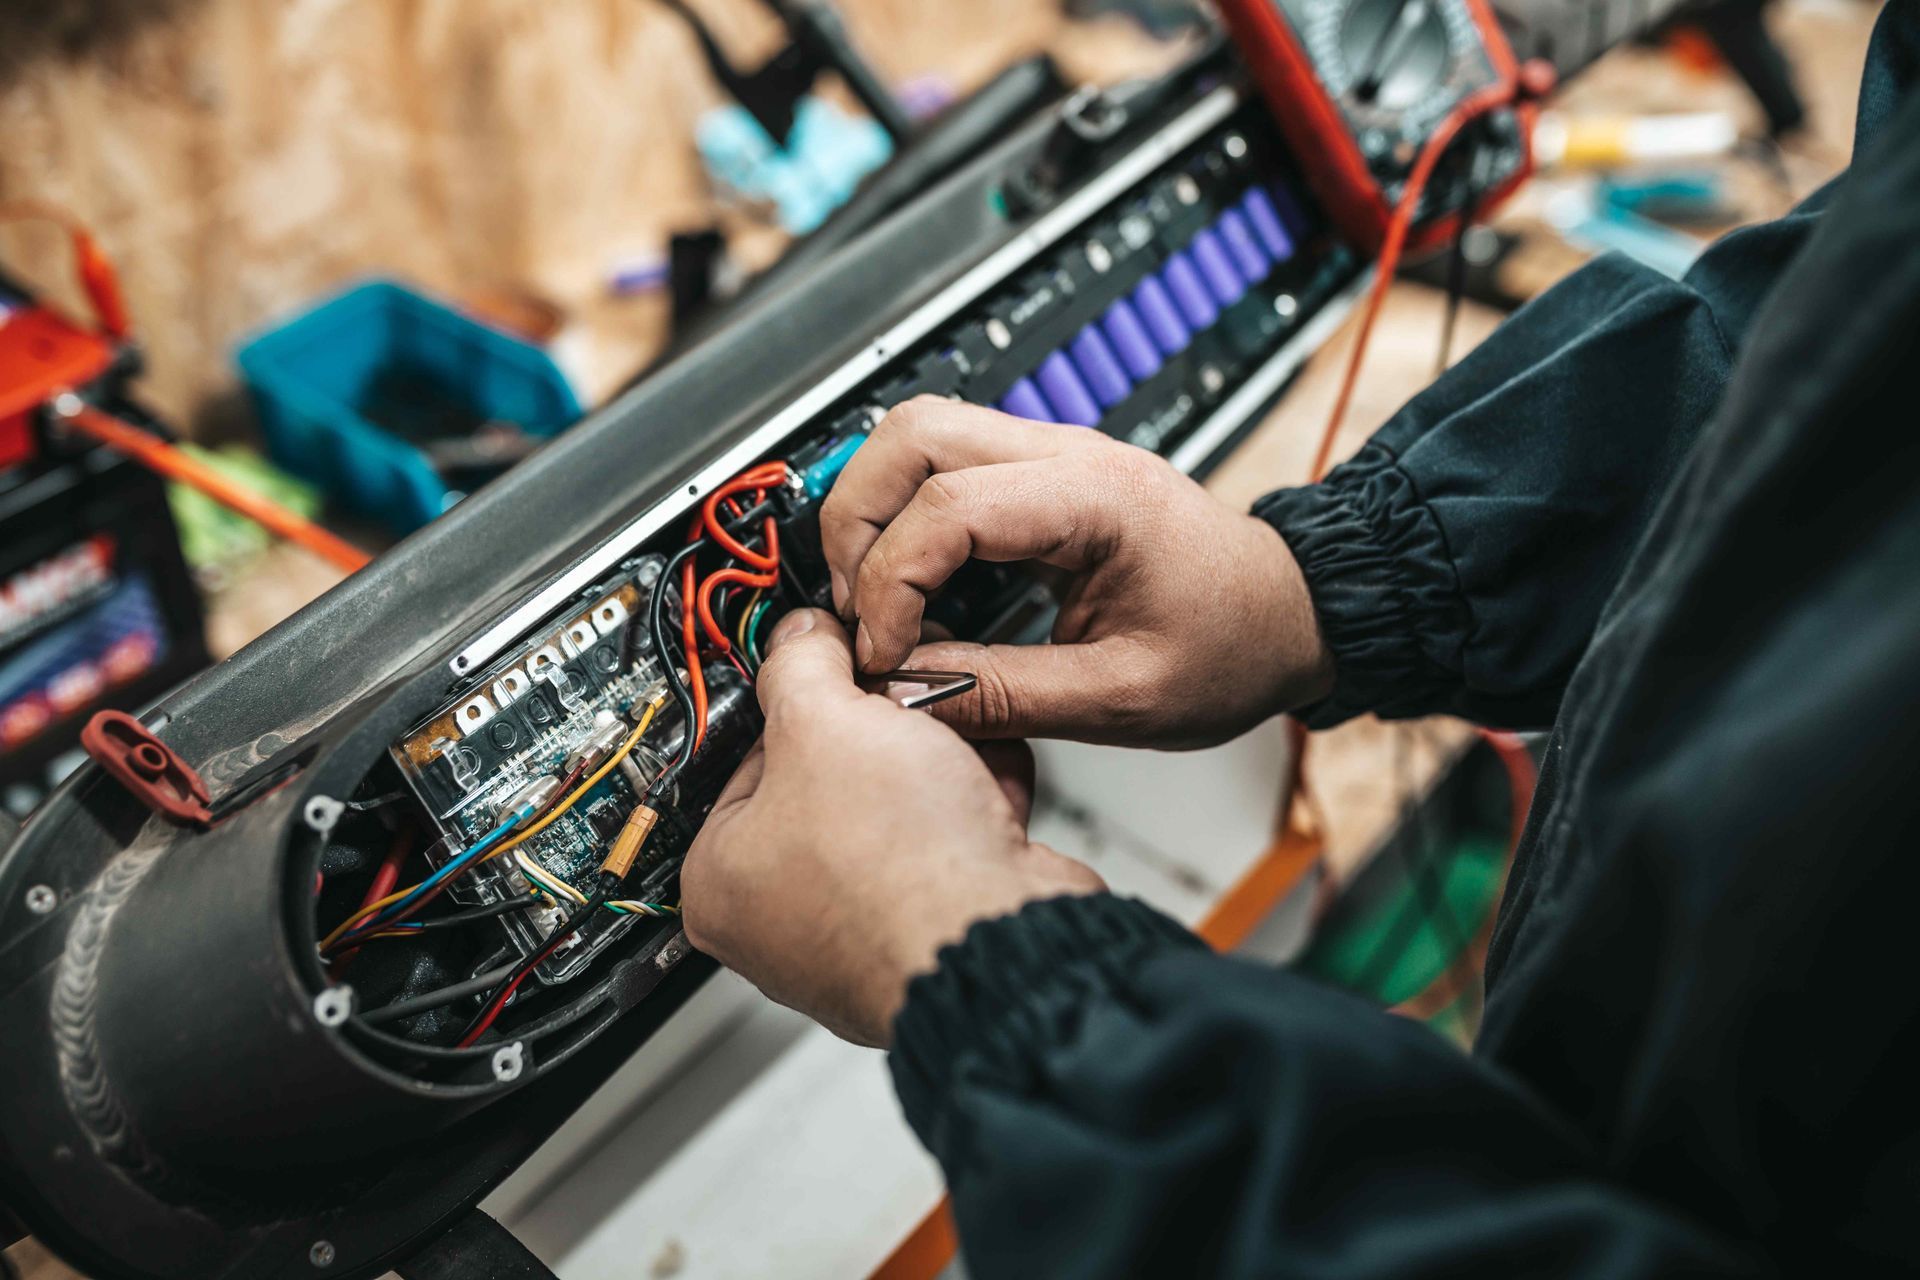 zoom in on hands wiring a piece of equipment